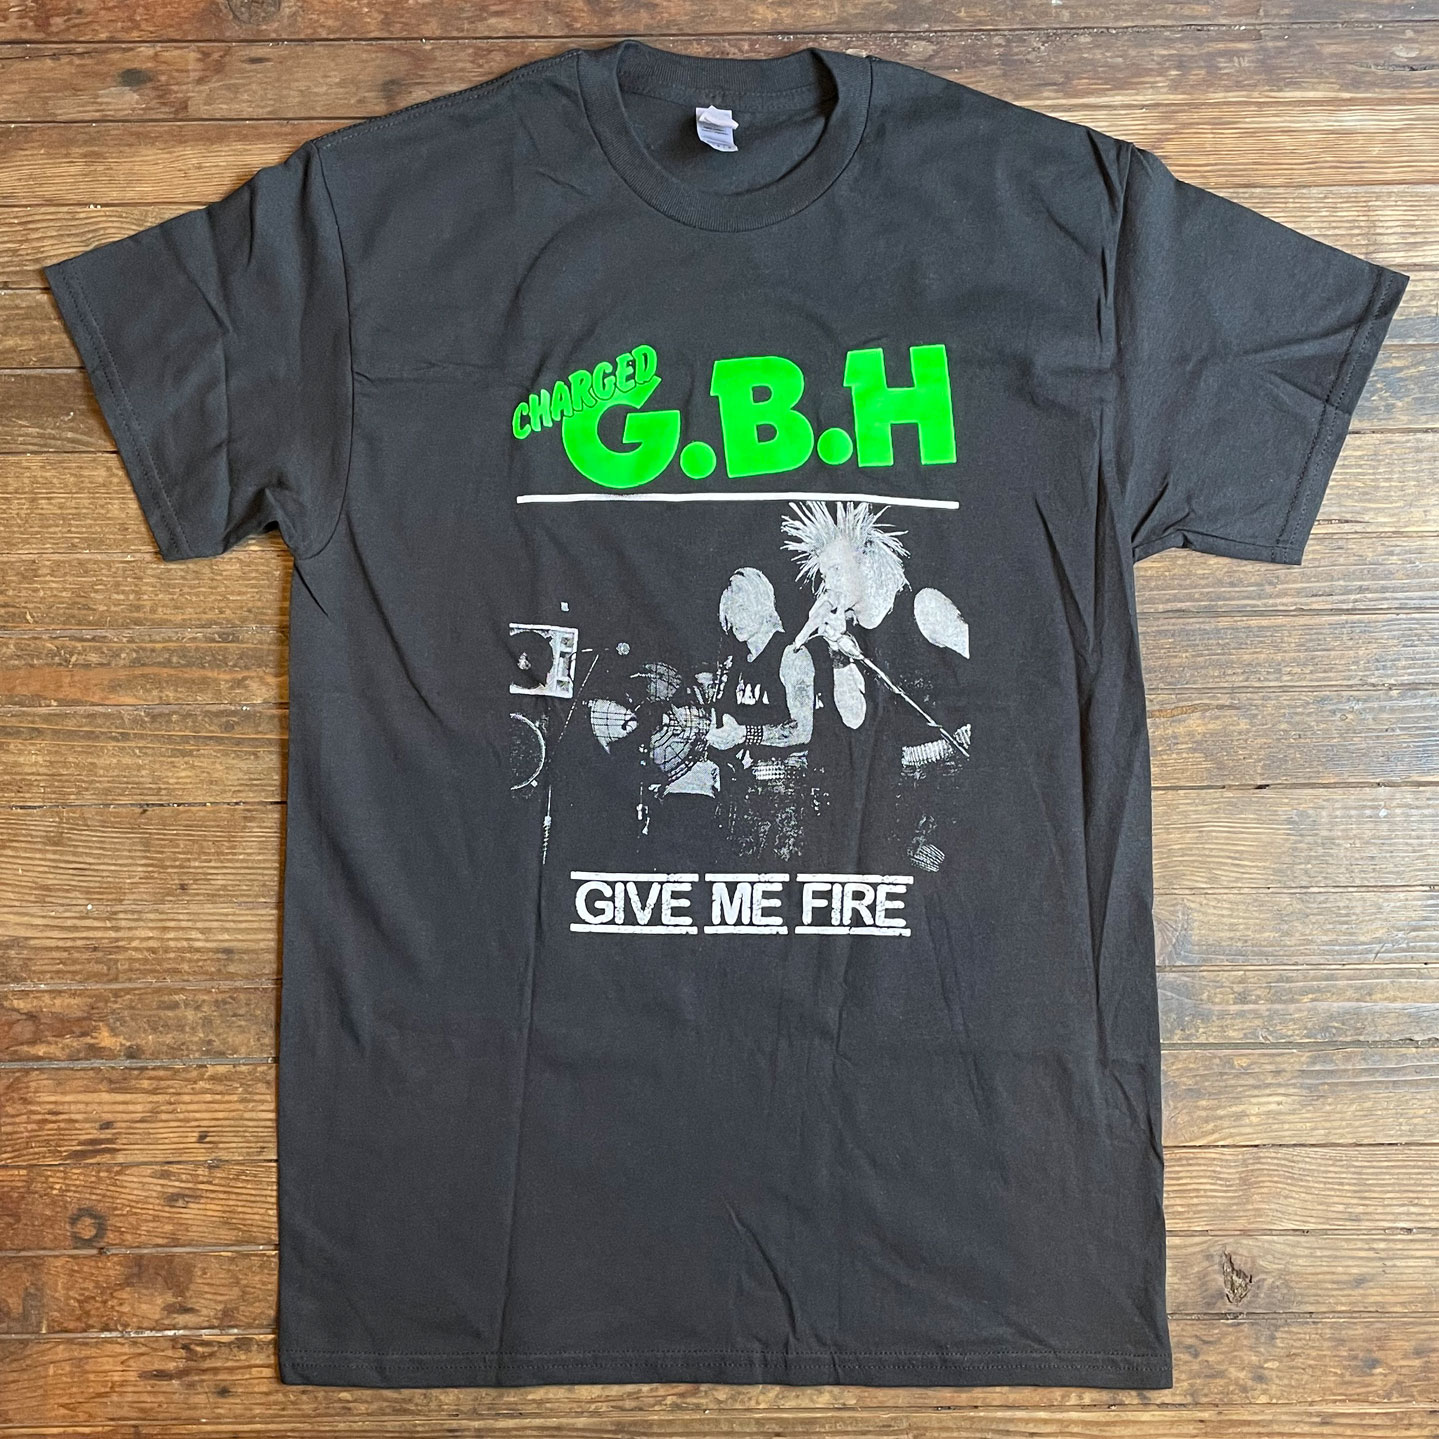 G.B.H Tシャツ GIVE ME FIRE